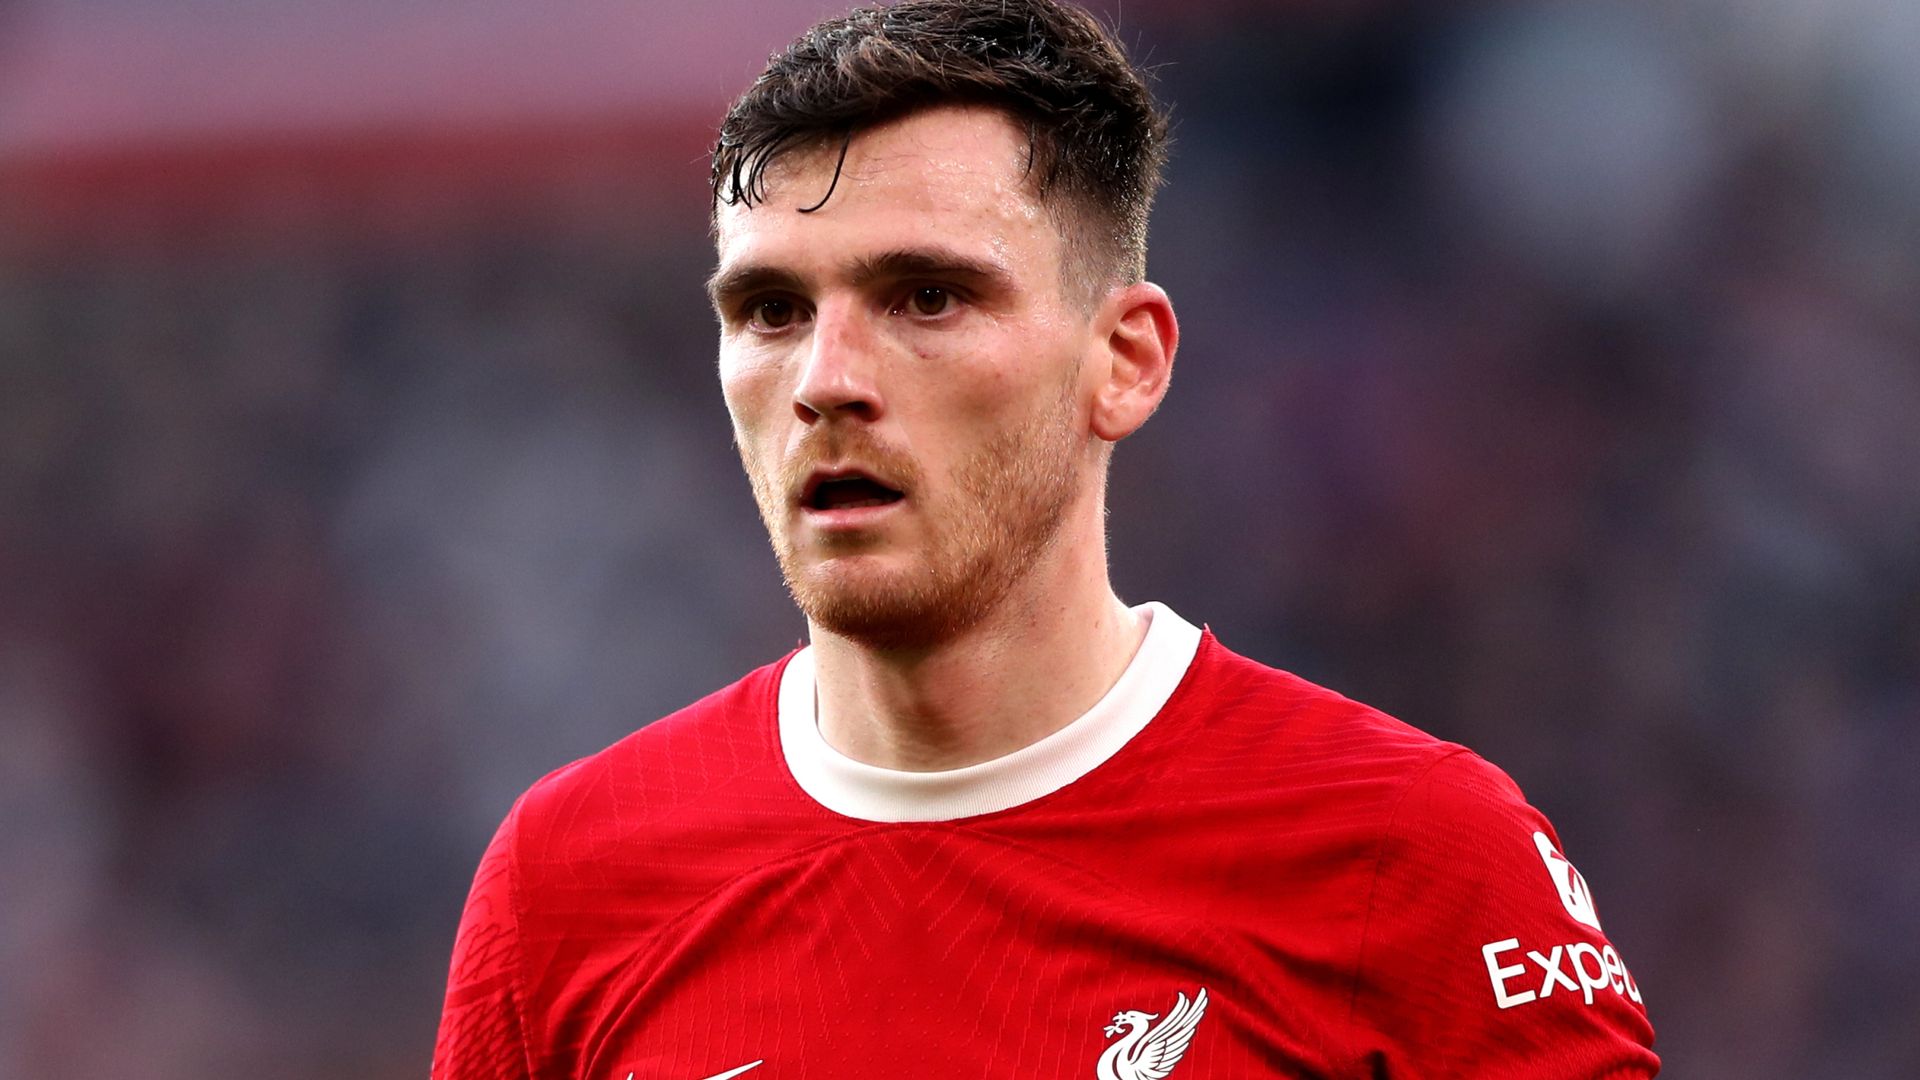 Liverpool vs Brighton preview: Robertson assessed 'day by day' - Klopp